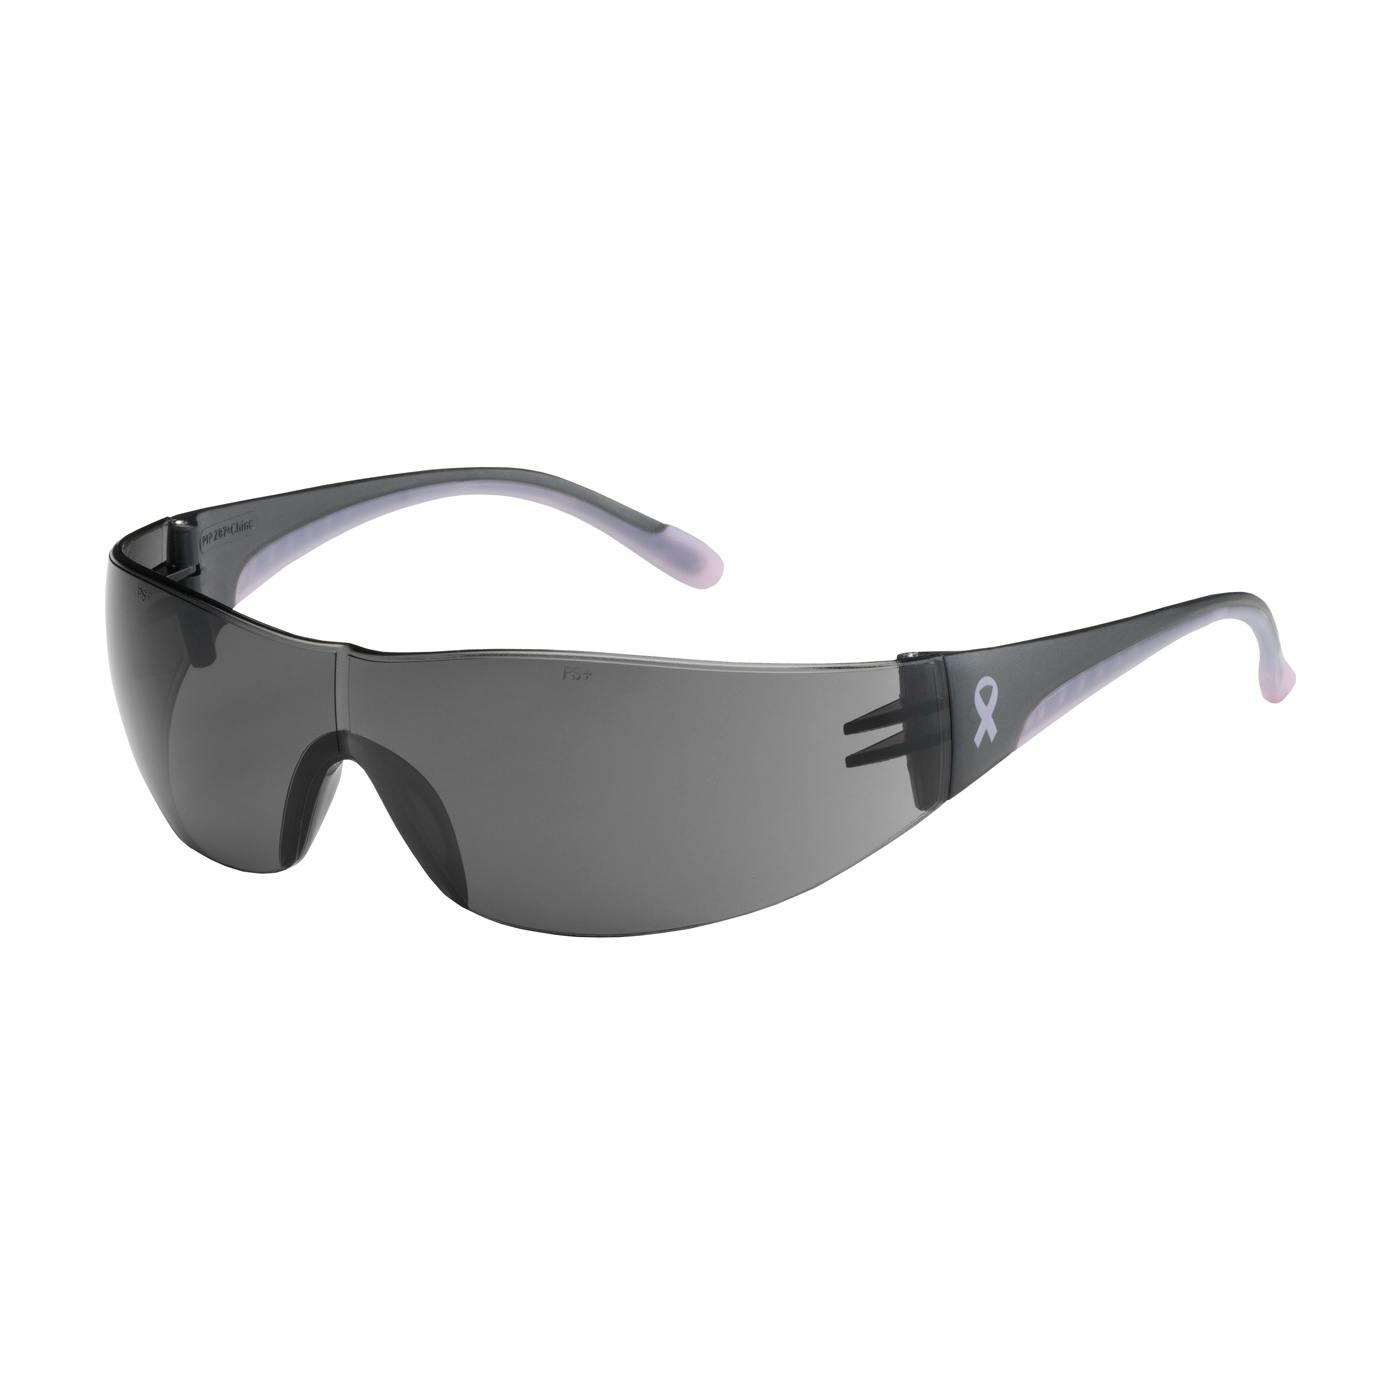 Rimless Safety Glasses with Gray / Pink Temple, Gray Lens and Anti-Scratch Coating, Pink (250-10-5501) - OS_0